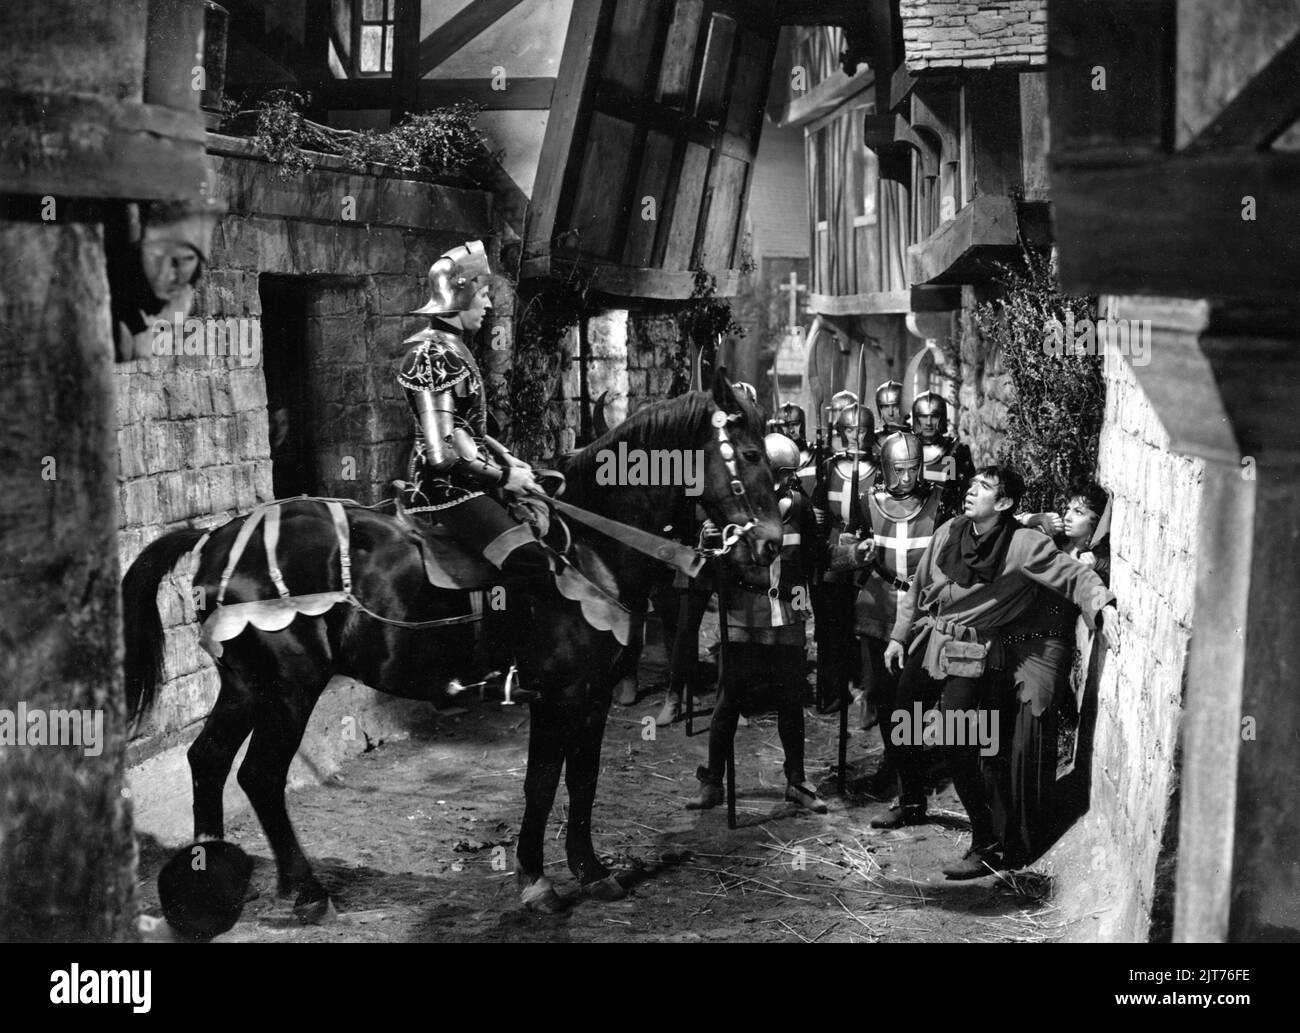 ANTHONY QUINN as Quasimodo and GINA LOLLOBRIGIDA as Esmeralda with Soldiers on Paris Street in THE HUNCHBACK OF NOTRE DAME / NOTRE DAME DE PARIS 1956 director JEAN DELANNOY novel Victor Hugo adaptation / dialogue Jean Aurenche and Jacques Prevert music Georges Auric costume design Georges Benda production design Rene Renoux choreographer Leonid Massine producers Raymond and Robert Hakim France - Italy co-production Paris Film Productions / Panitalia Stock Photo